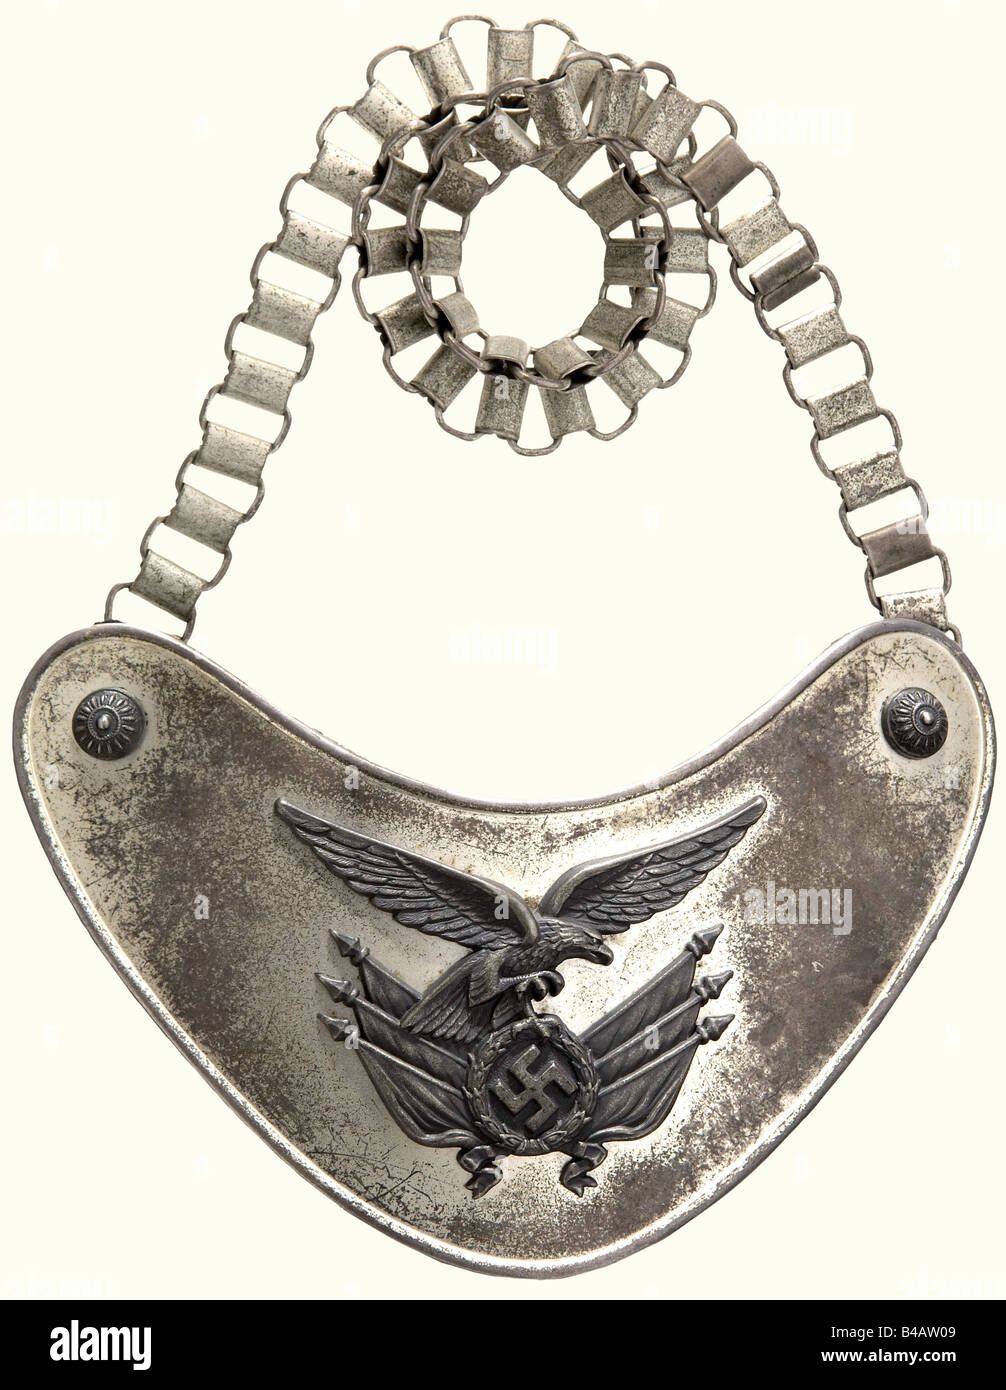 A standard bearer's gorget., Silvered (somewhat faded) white metal with toned fittings and rosettes for the reverse chain hooks, the back is lined with Luftwaffe blue felt. The central hook with manufacturer's mark 'C.E. Juncker, Berlin'. Silvered chain. Ca. 13 x 19 cm. Of the greatest rarity.' historic, historical, 1930s, 1930s, 20th century, Air Force, branch of service, branches of service, armed service, armed services, military, militaria, air forces, object, objects, stills, clipping, clippings, cut out, cut-out, cut-outs, fine arts, art, art object, art , Stock Photo